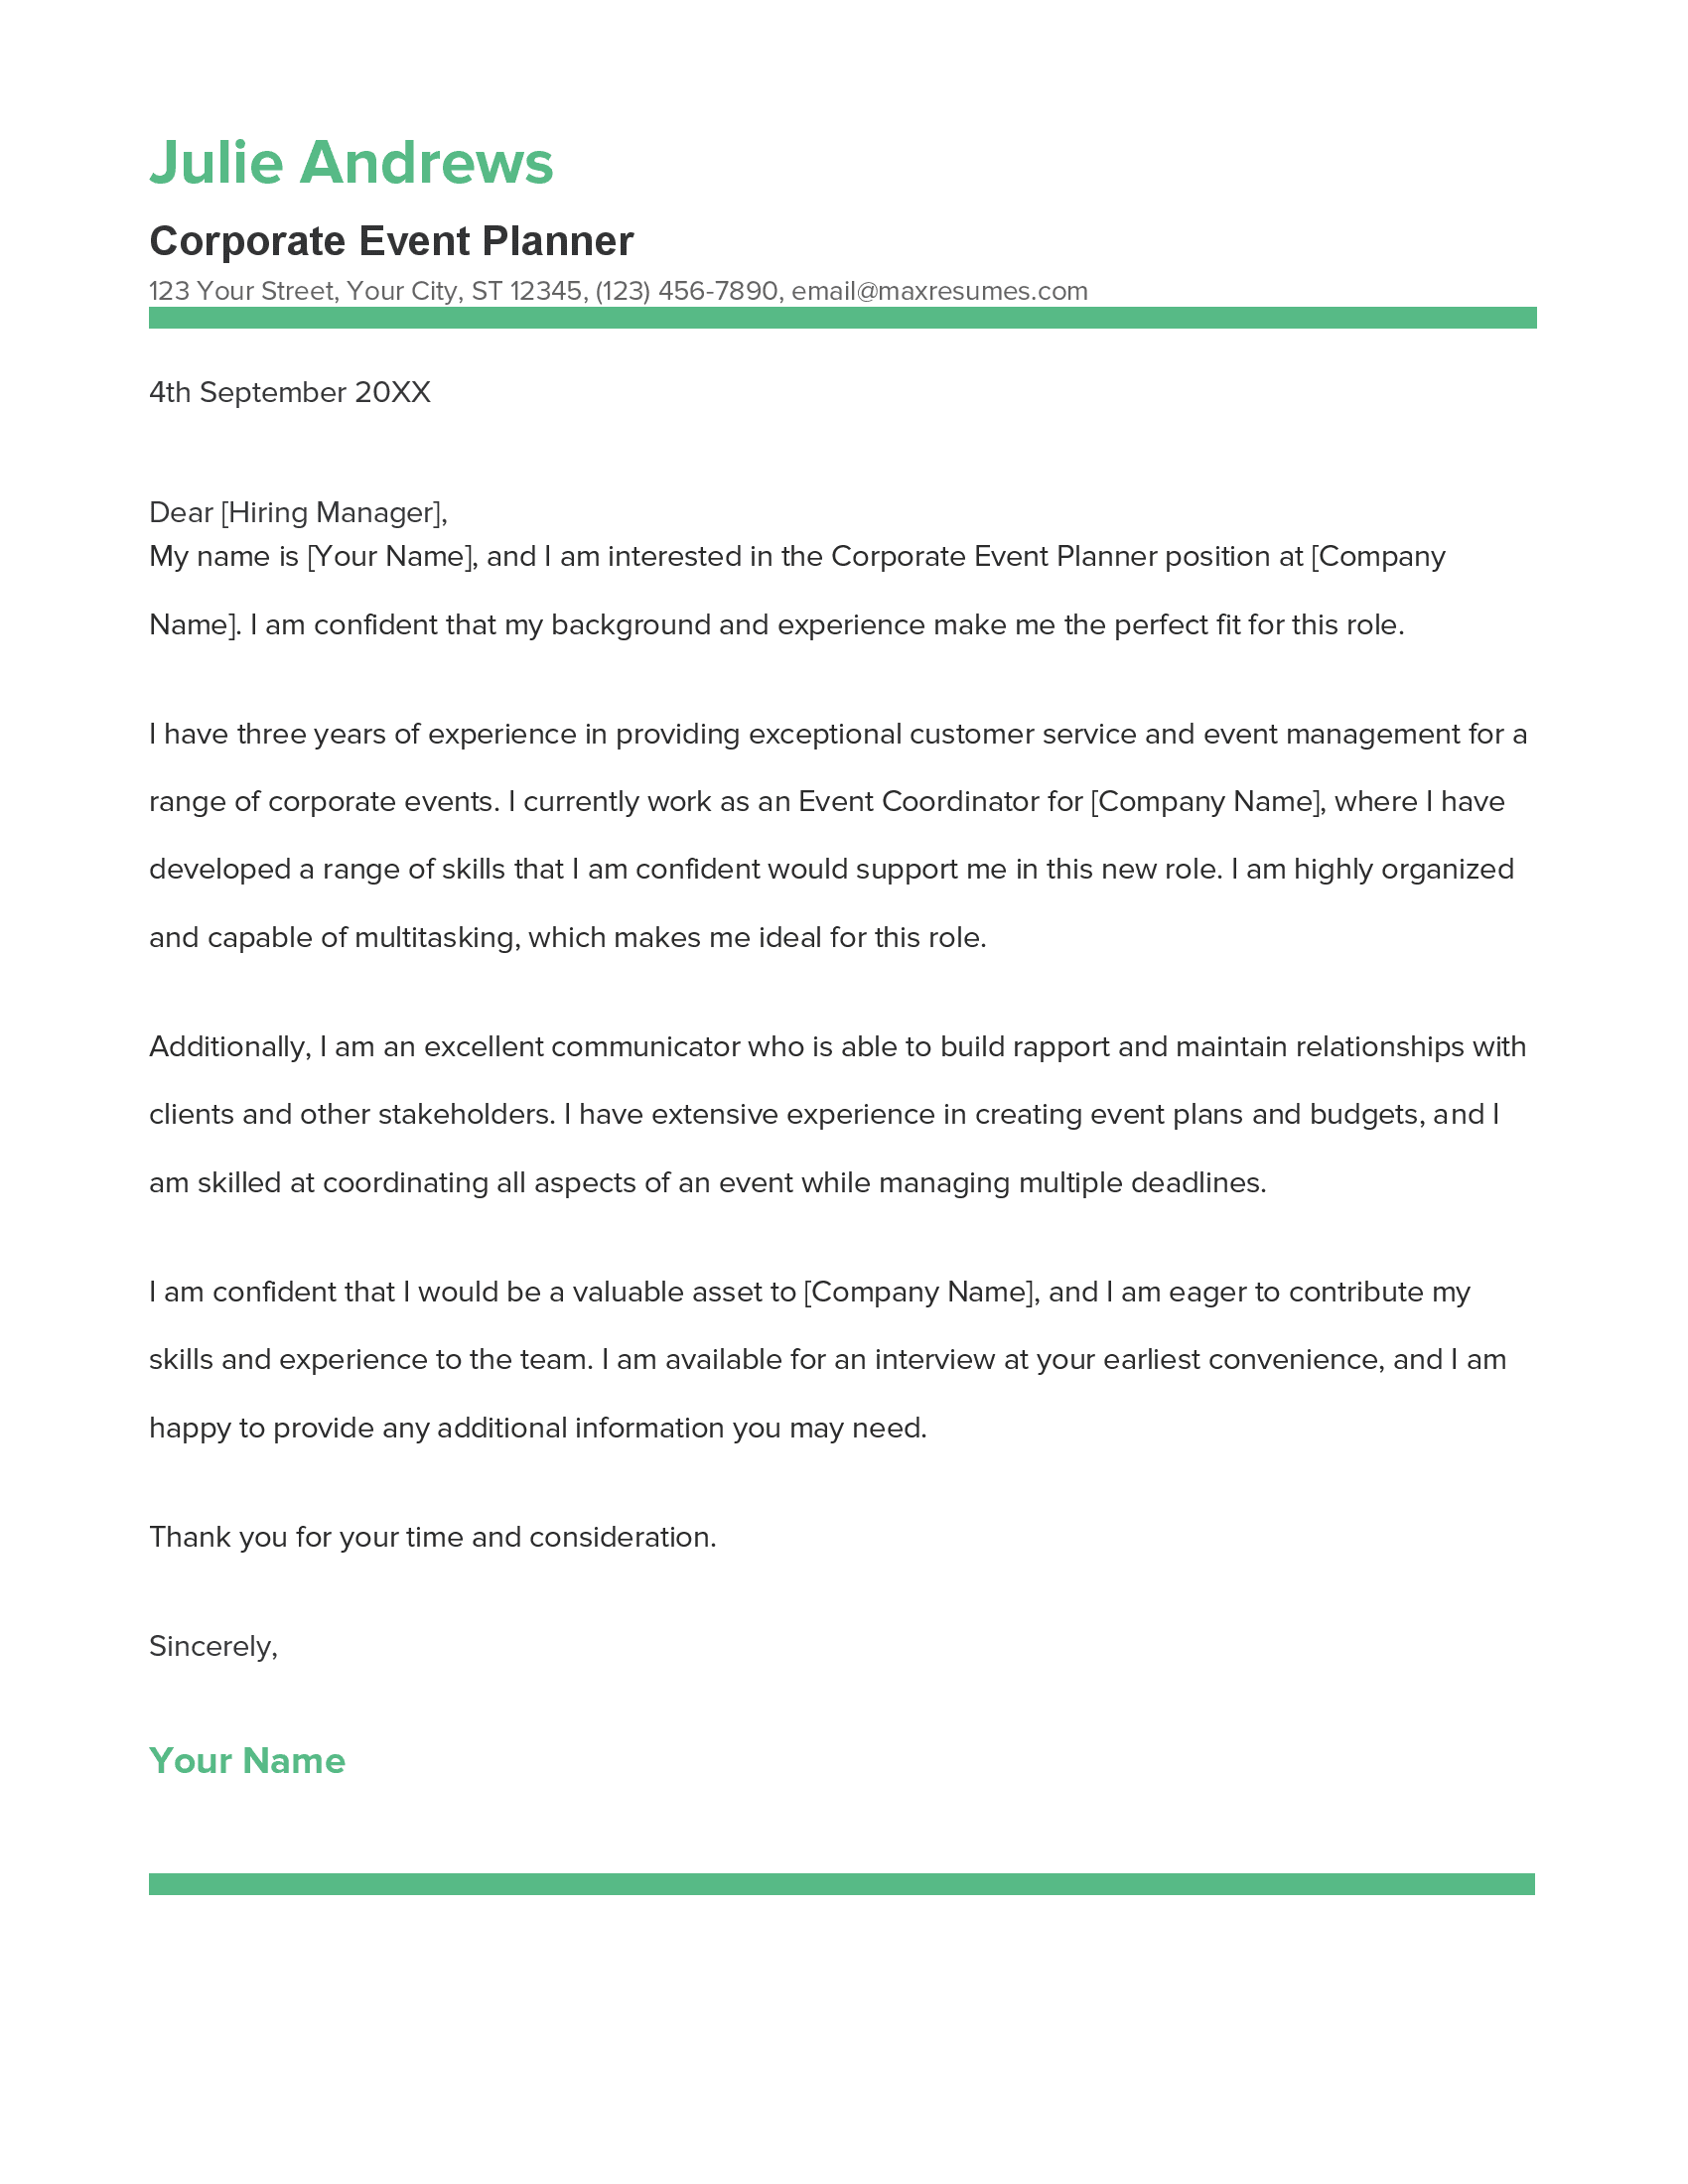 Corporate Event Planner Cover Letter Example